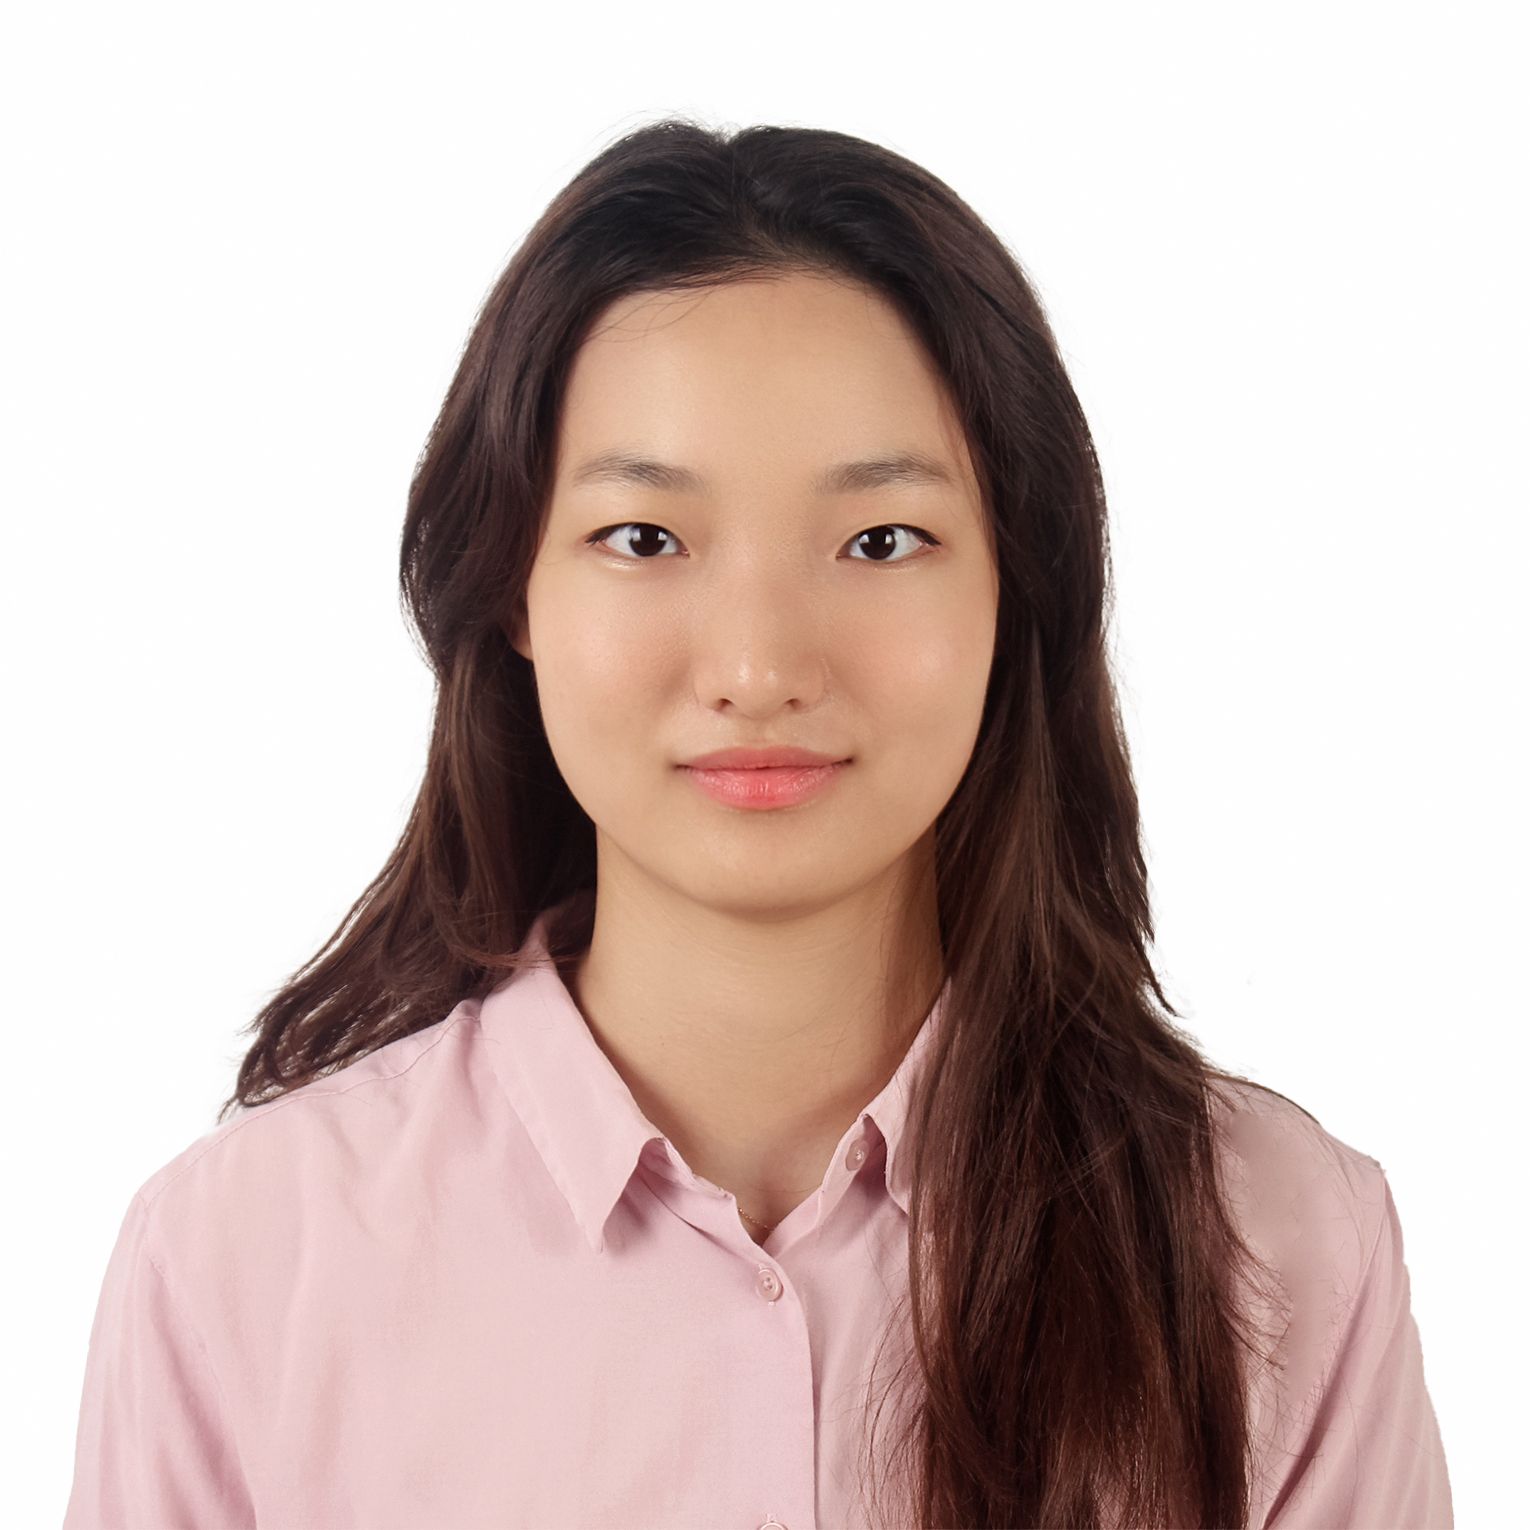 Headshot of an Asian woman with long brown hair wearing a pink collared shirt.